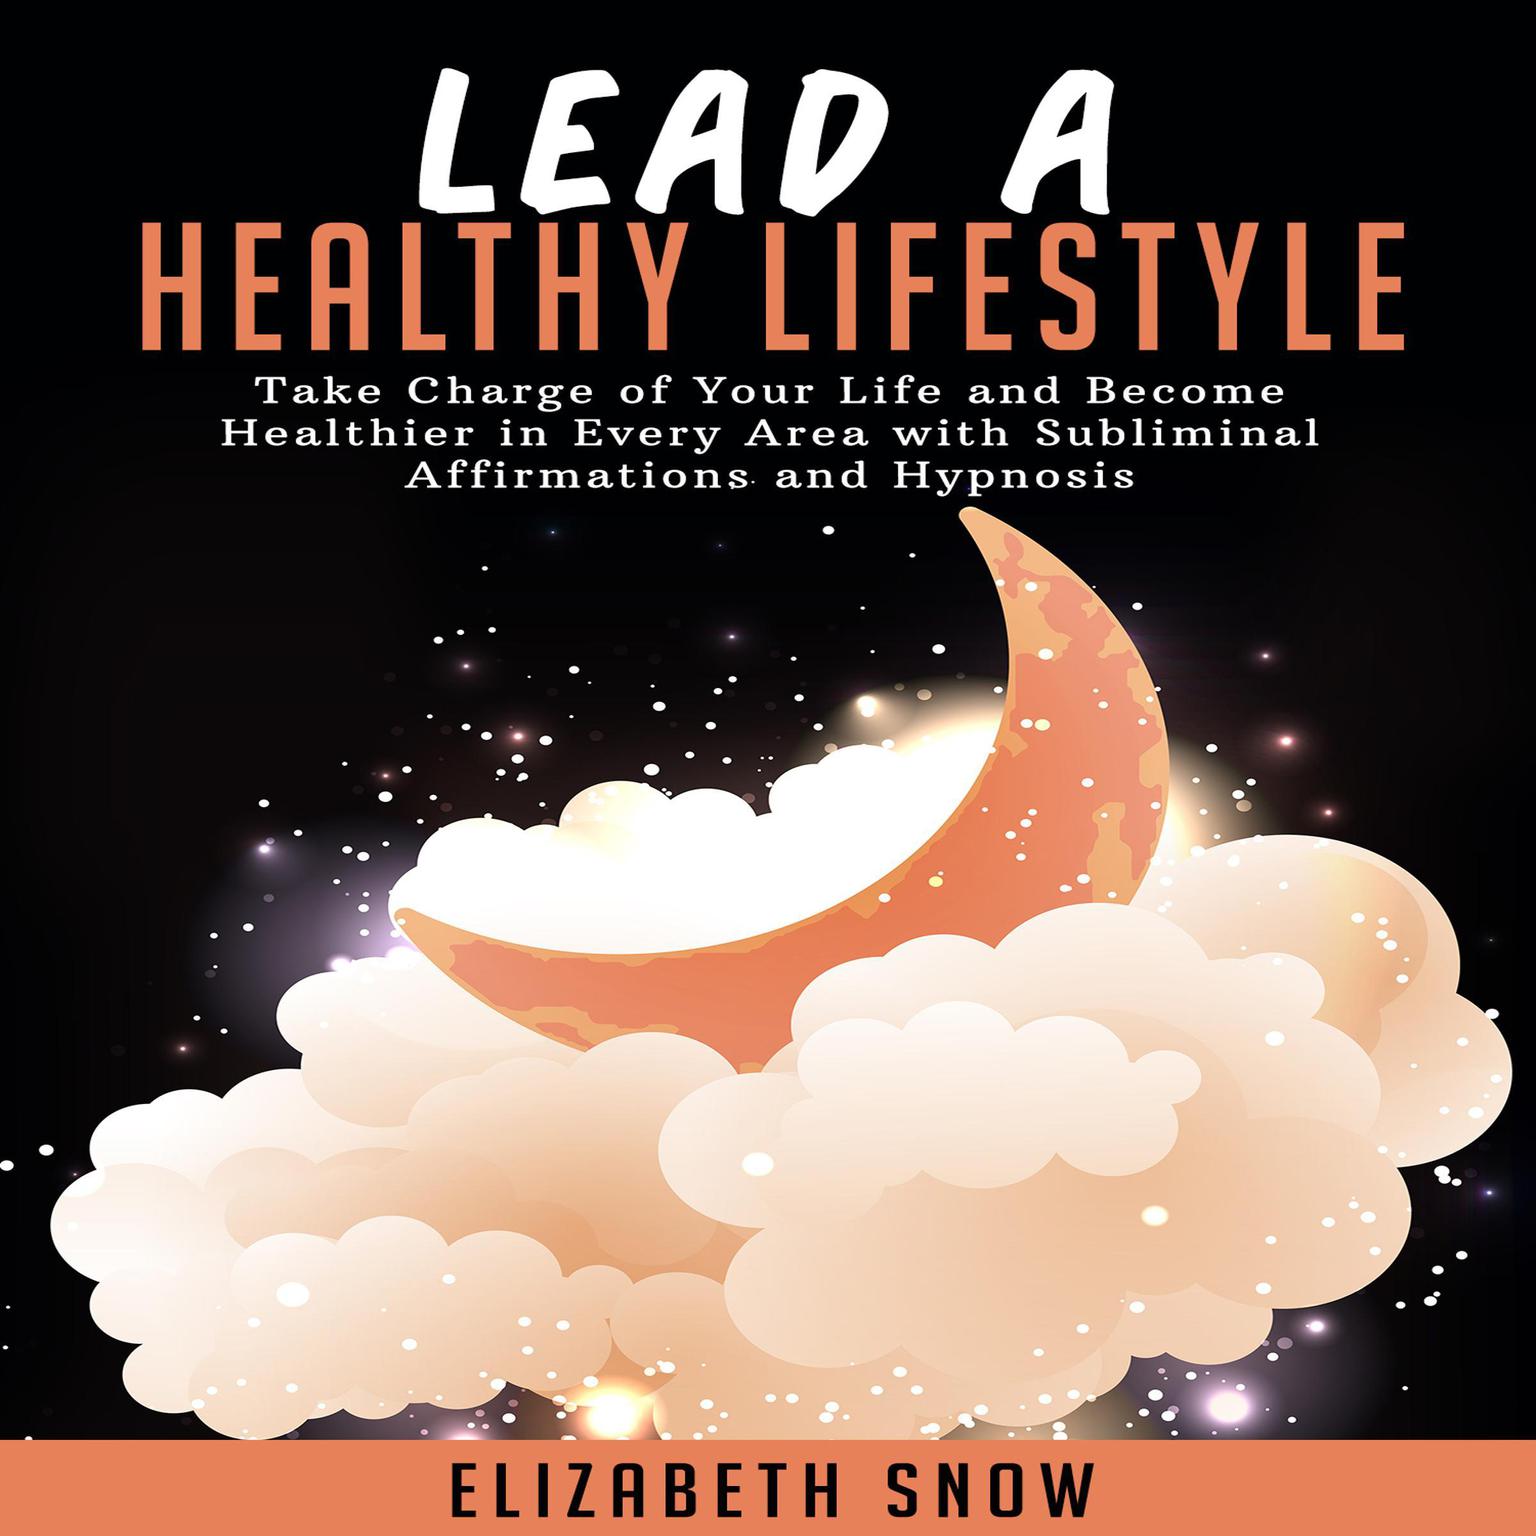 Lead a Healthy Lifestyle: Take Charge of Your Life and Become Healthier in Every Area with Subliminal Affirmations and Hypnosis Audiobook, by Elizabeth Snow